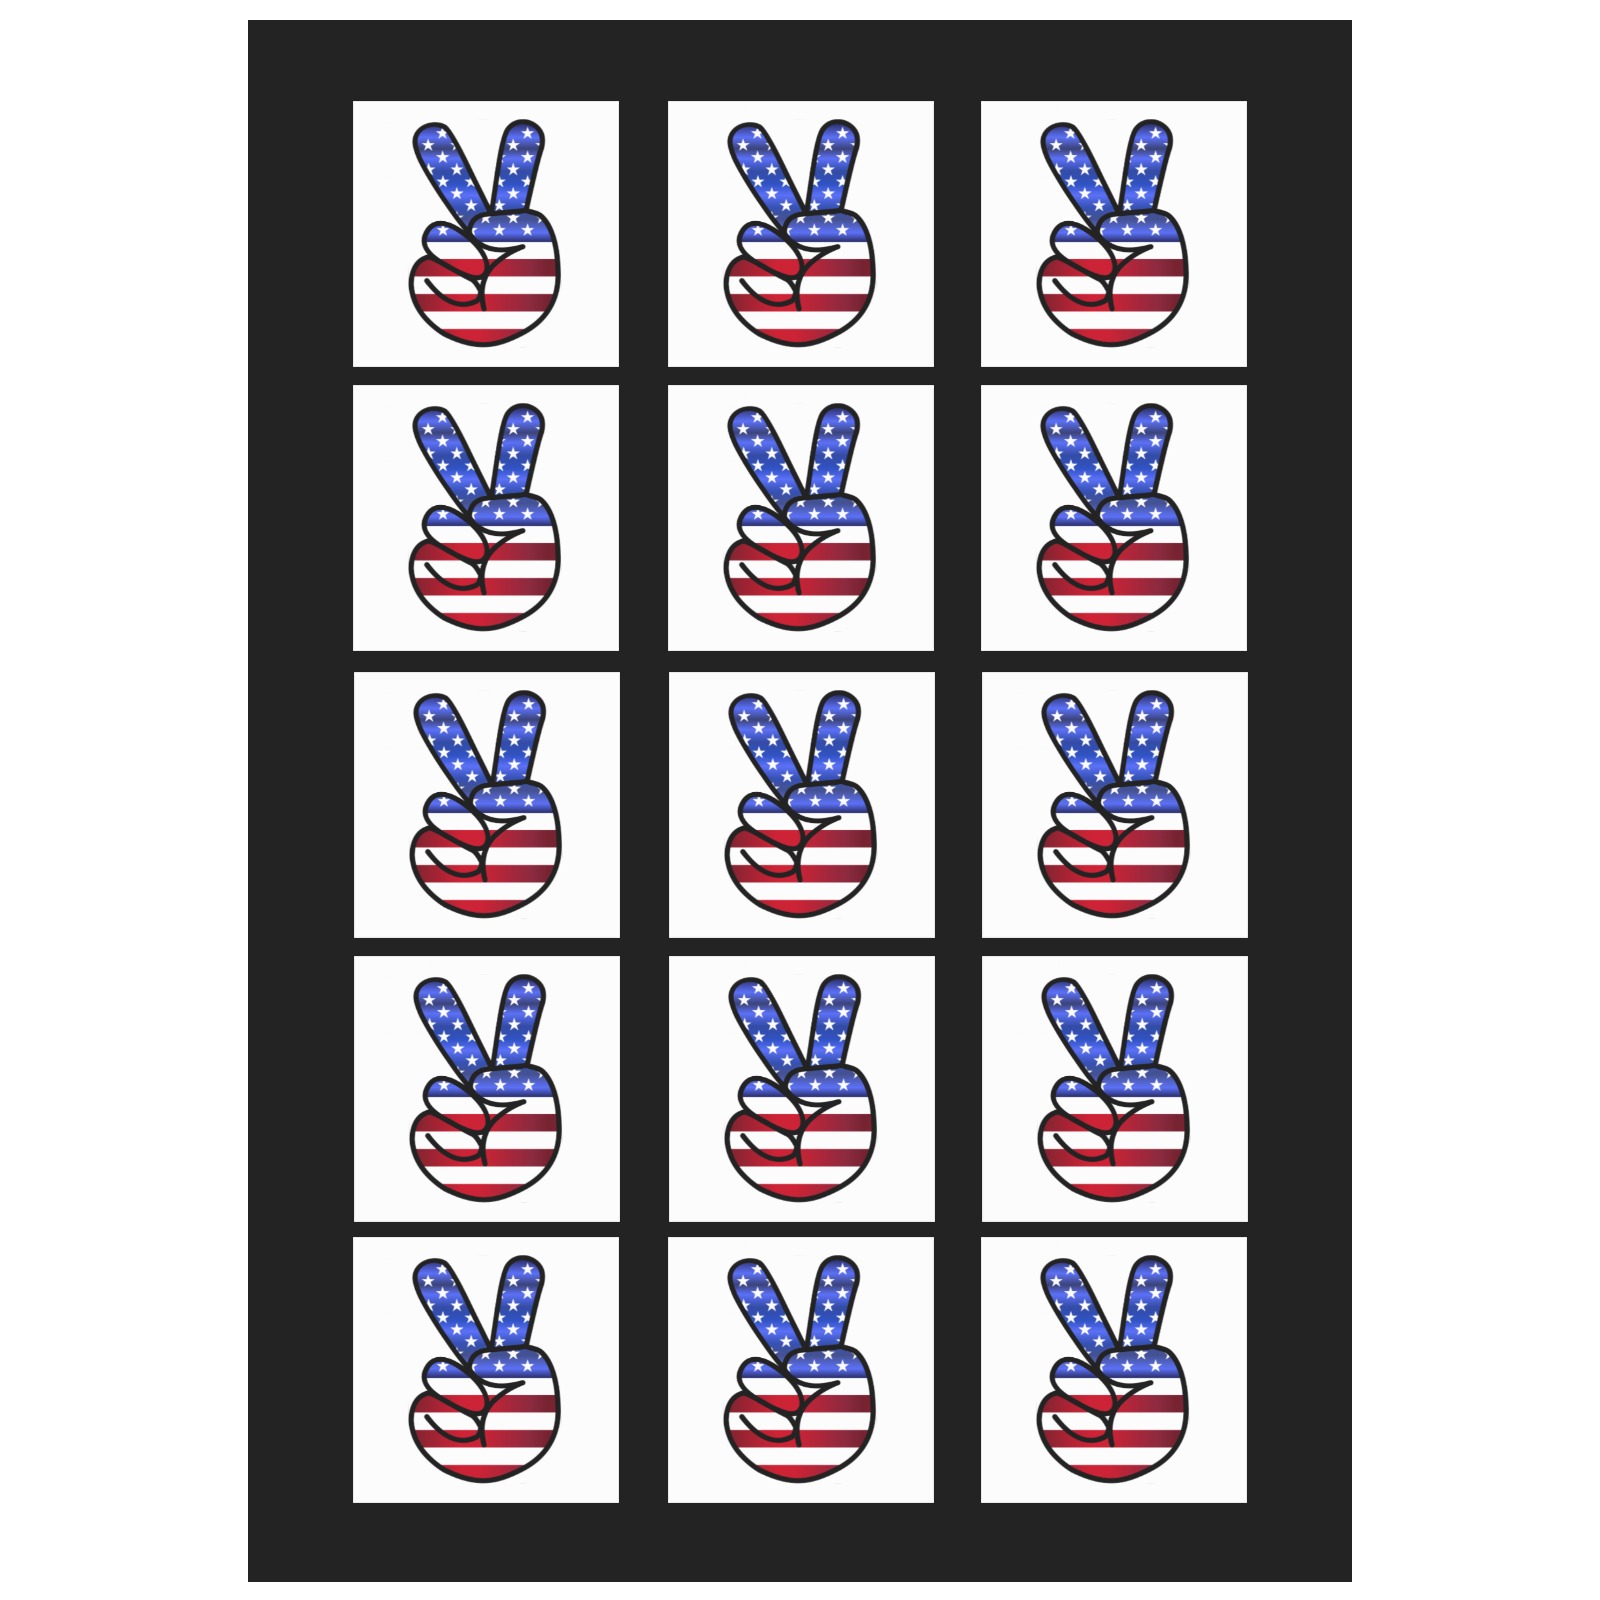 USA Victory Peace Sign Personalized Temporary Tattoo (15 Pieces)